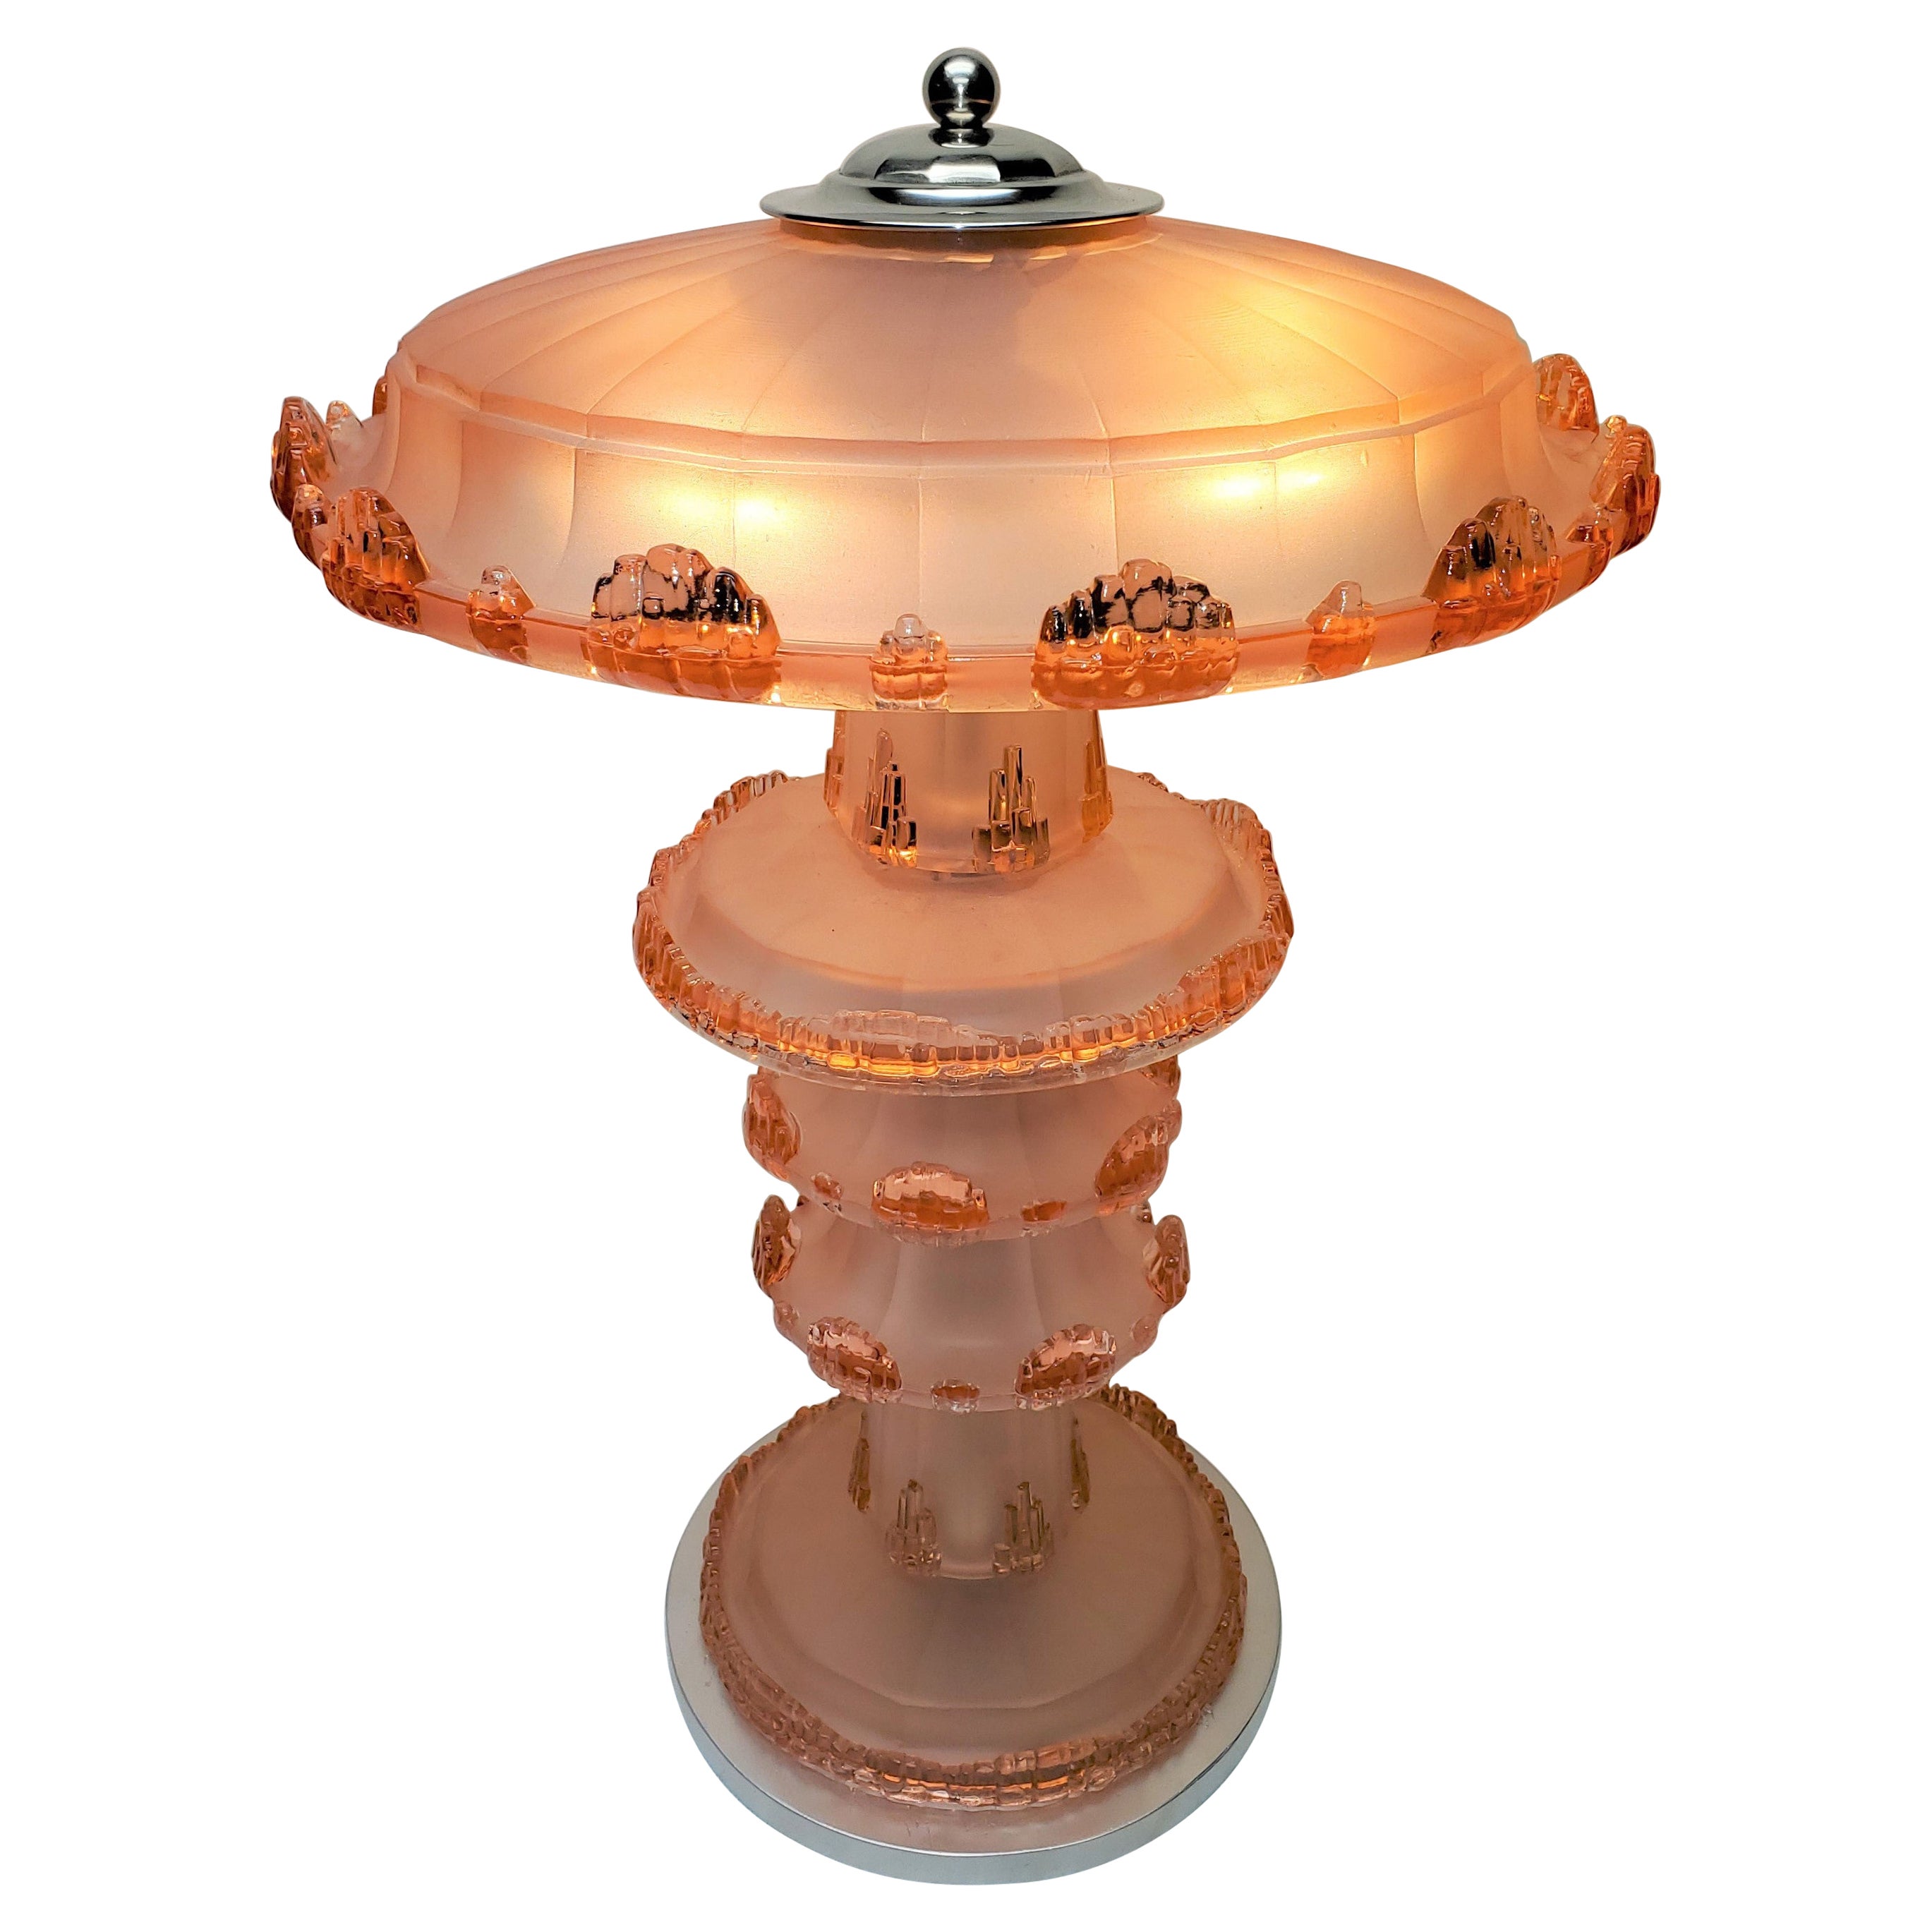 Original French Art Deco Pink/Peach Art Glass Table Lamp by Jean Gauthier